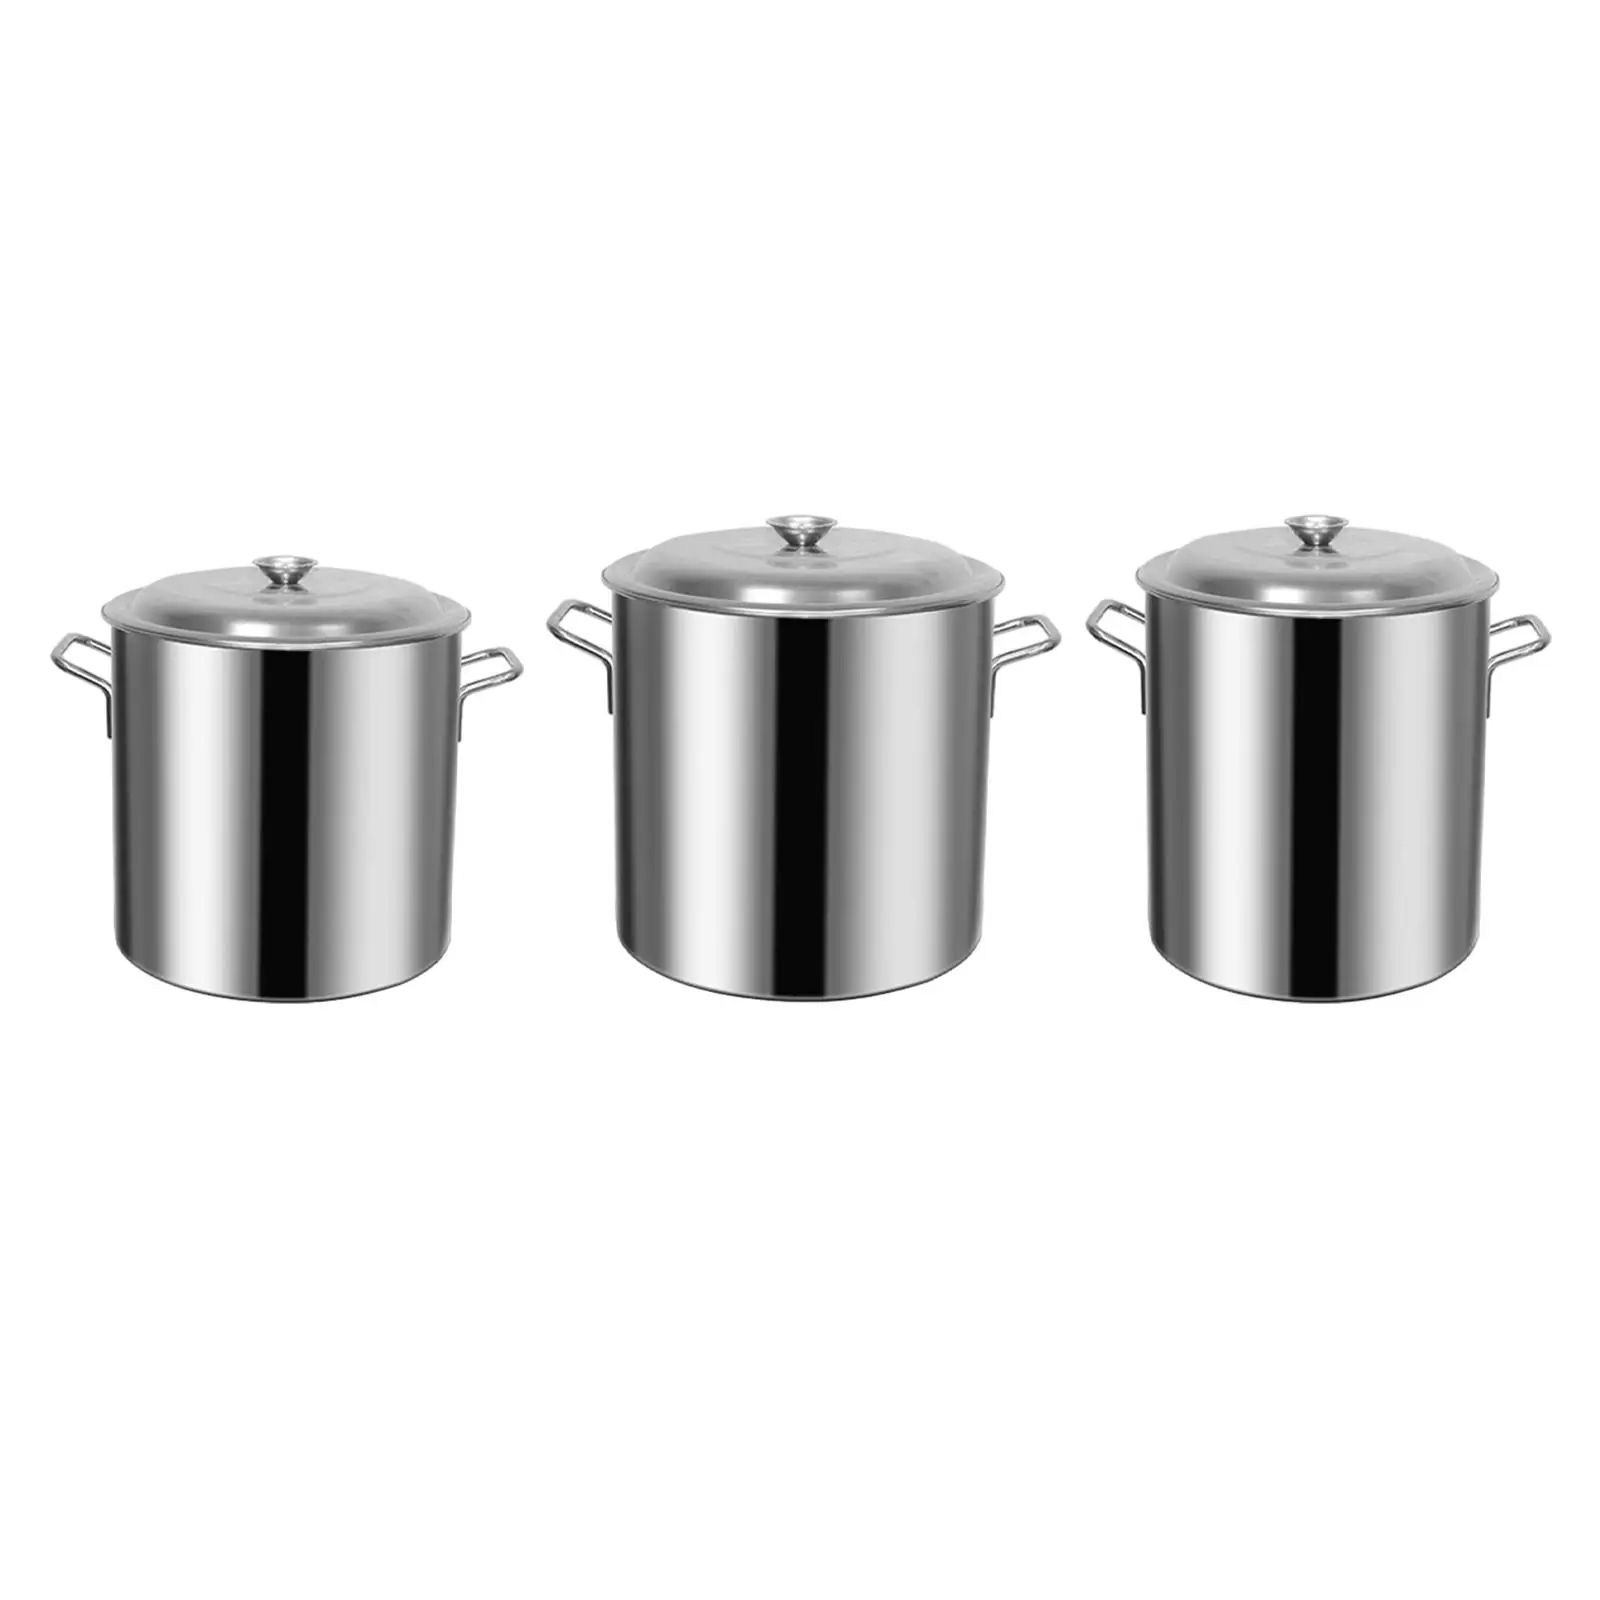 Cater Stew Soup Boiling Pan Double Handle Milk Tea Deep Pot with Lid Boiling Rice Composite Bottom Stockpot for Hotel Household